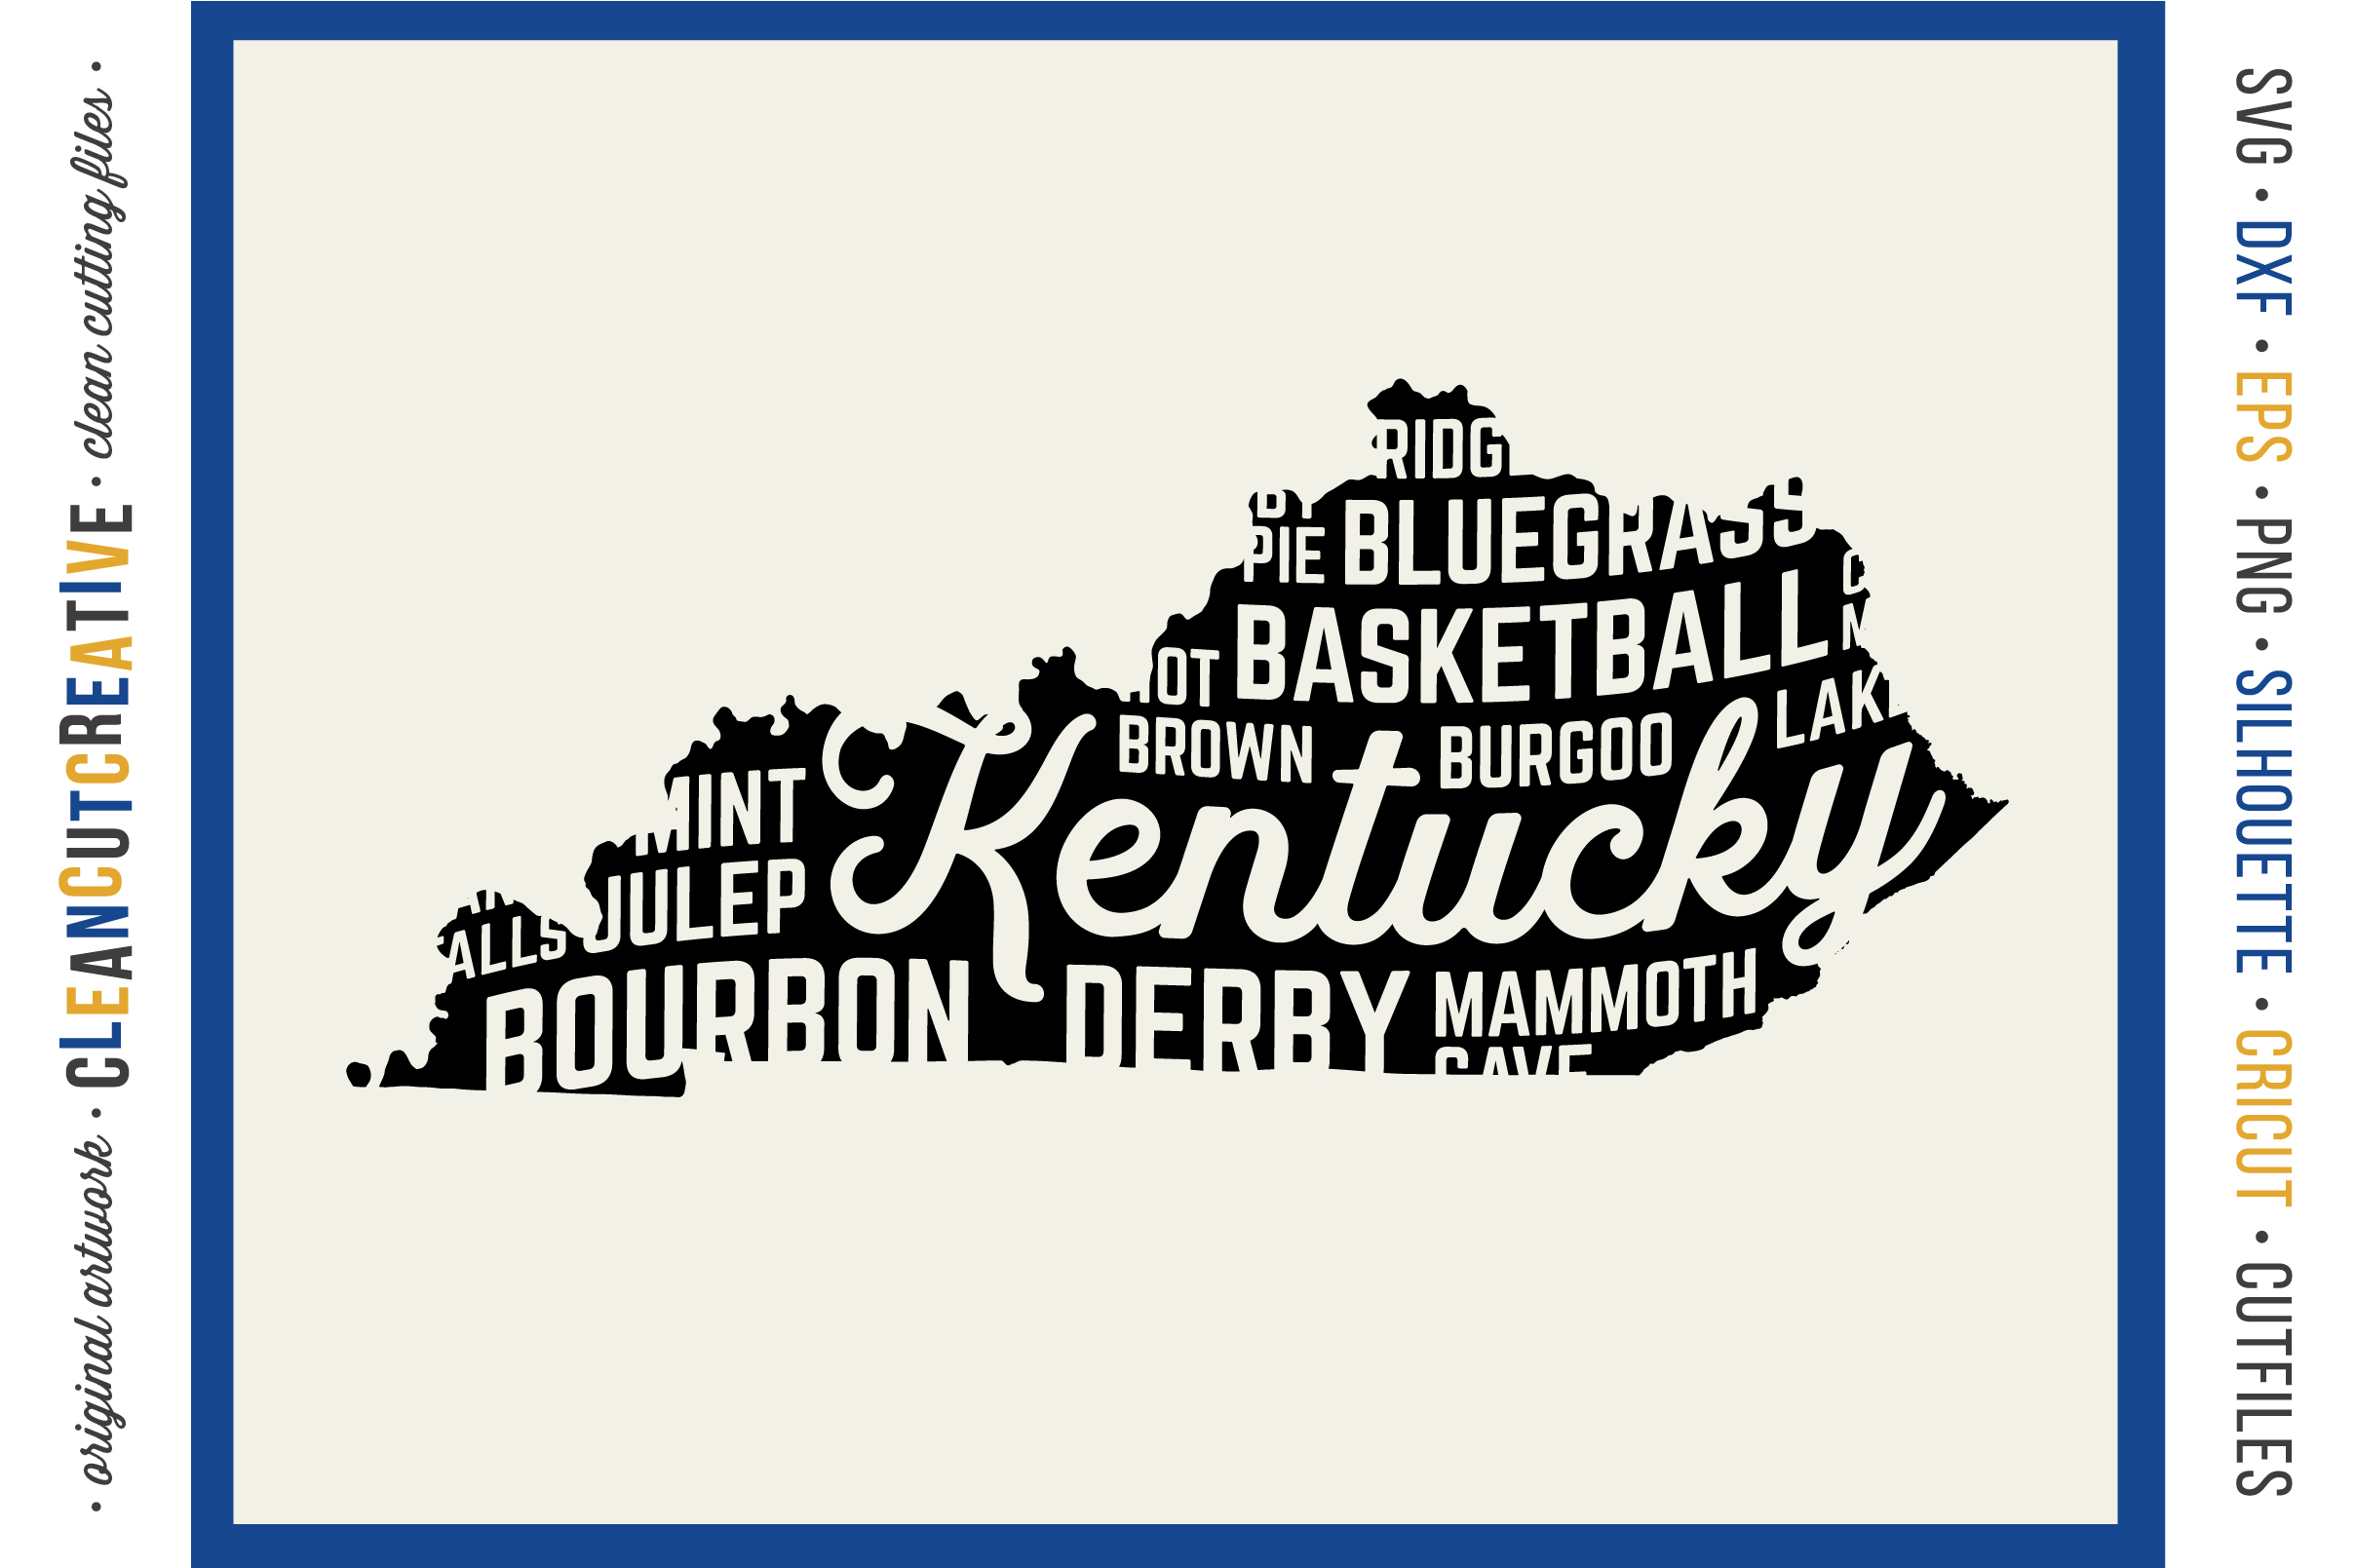 Download Kentucky State design - SVG DXF EPS PNG - Cricut & Silhouette - clean cutting files